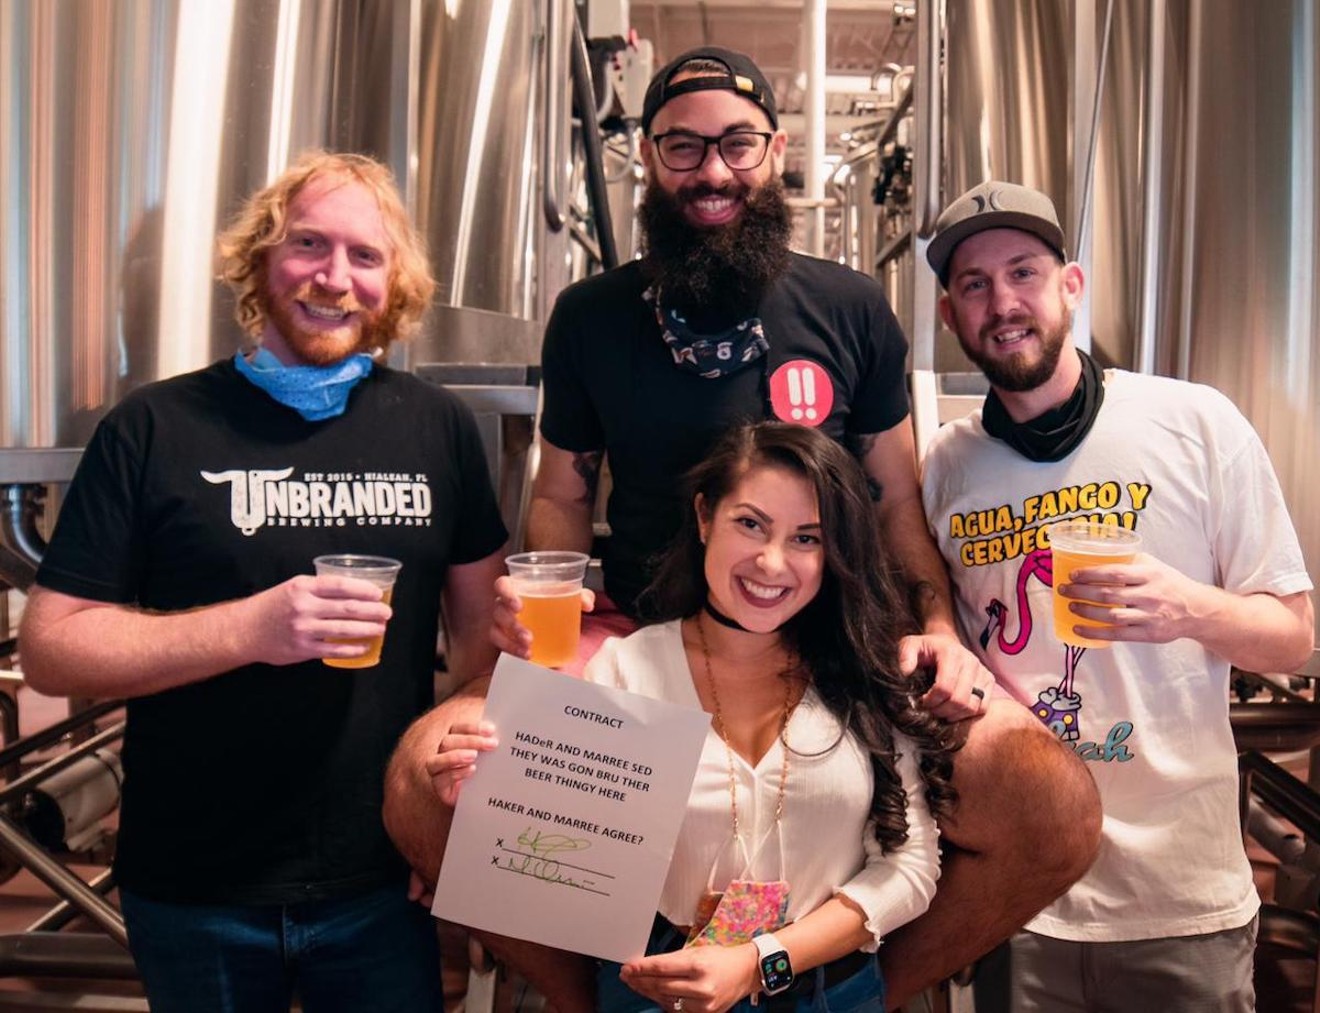 Shōjō Beer Co. cofounders Haidar Hachem (black T-shirt and glasses) and Marilyn Orozco (front and center) alongside Unbranded Brewing's Zach Swanson (left) and Lance Aschliman (right).